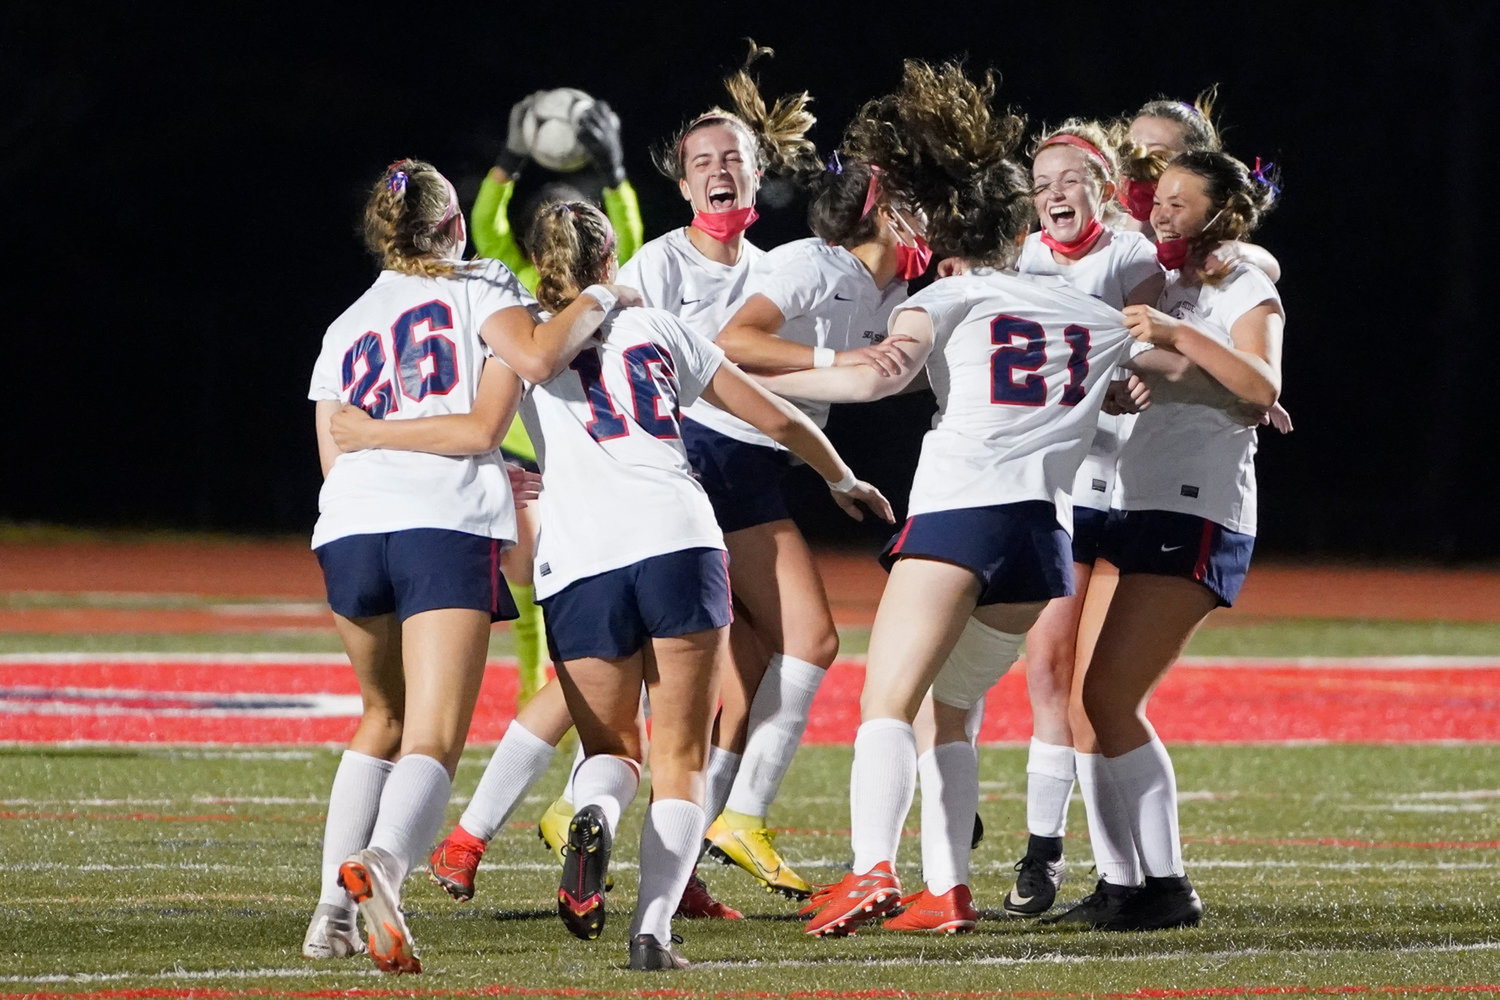 South Side High School girls’ varsity soccer coach Jude Massillon resigned on Monday after just one week on the job. The team won the Nassau County Class A title last year.